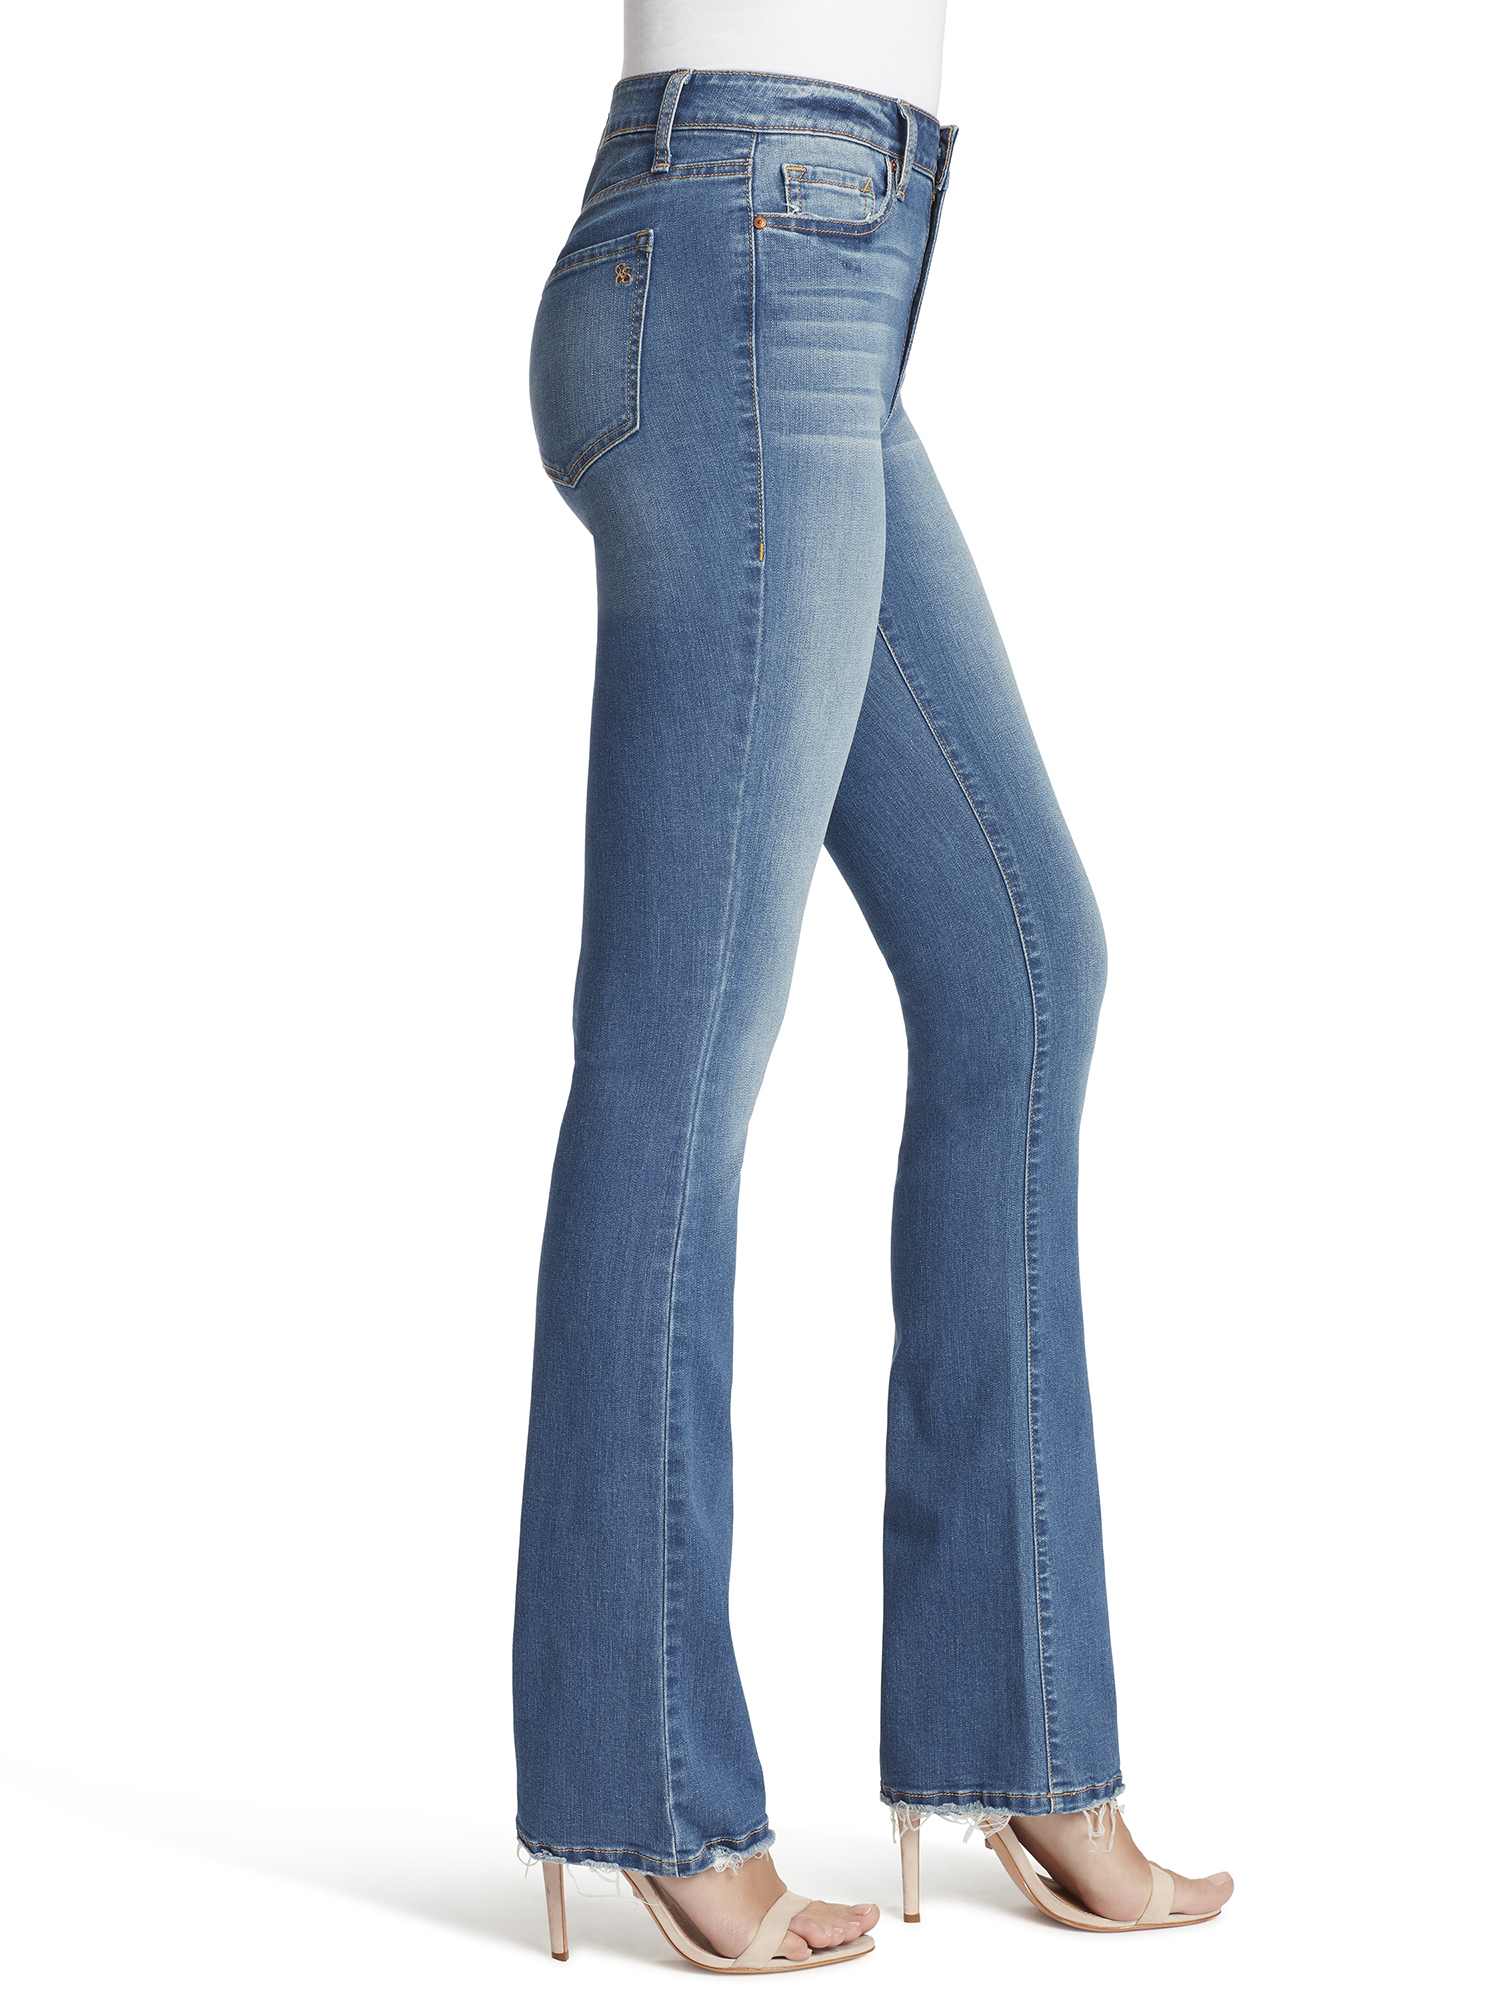 Jessica Simpson Women's Truly Yours Bootcut Jean - image 3 of 3